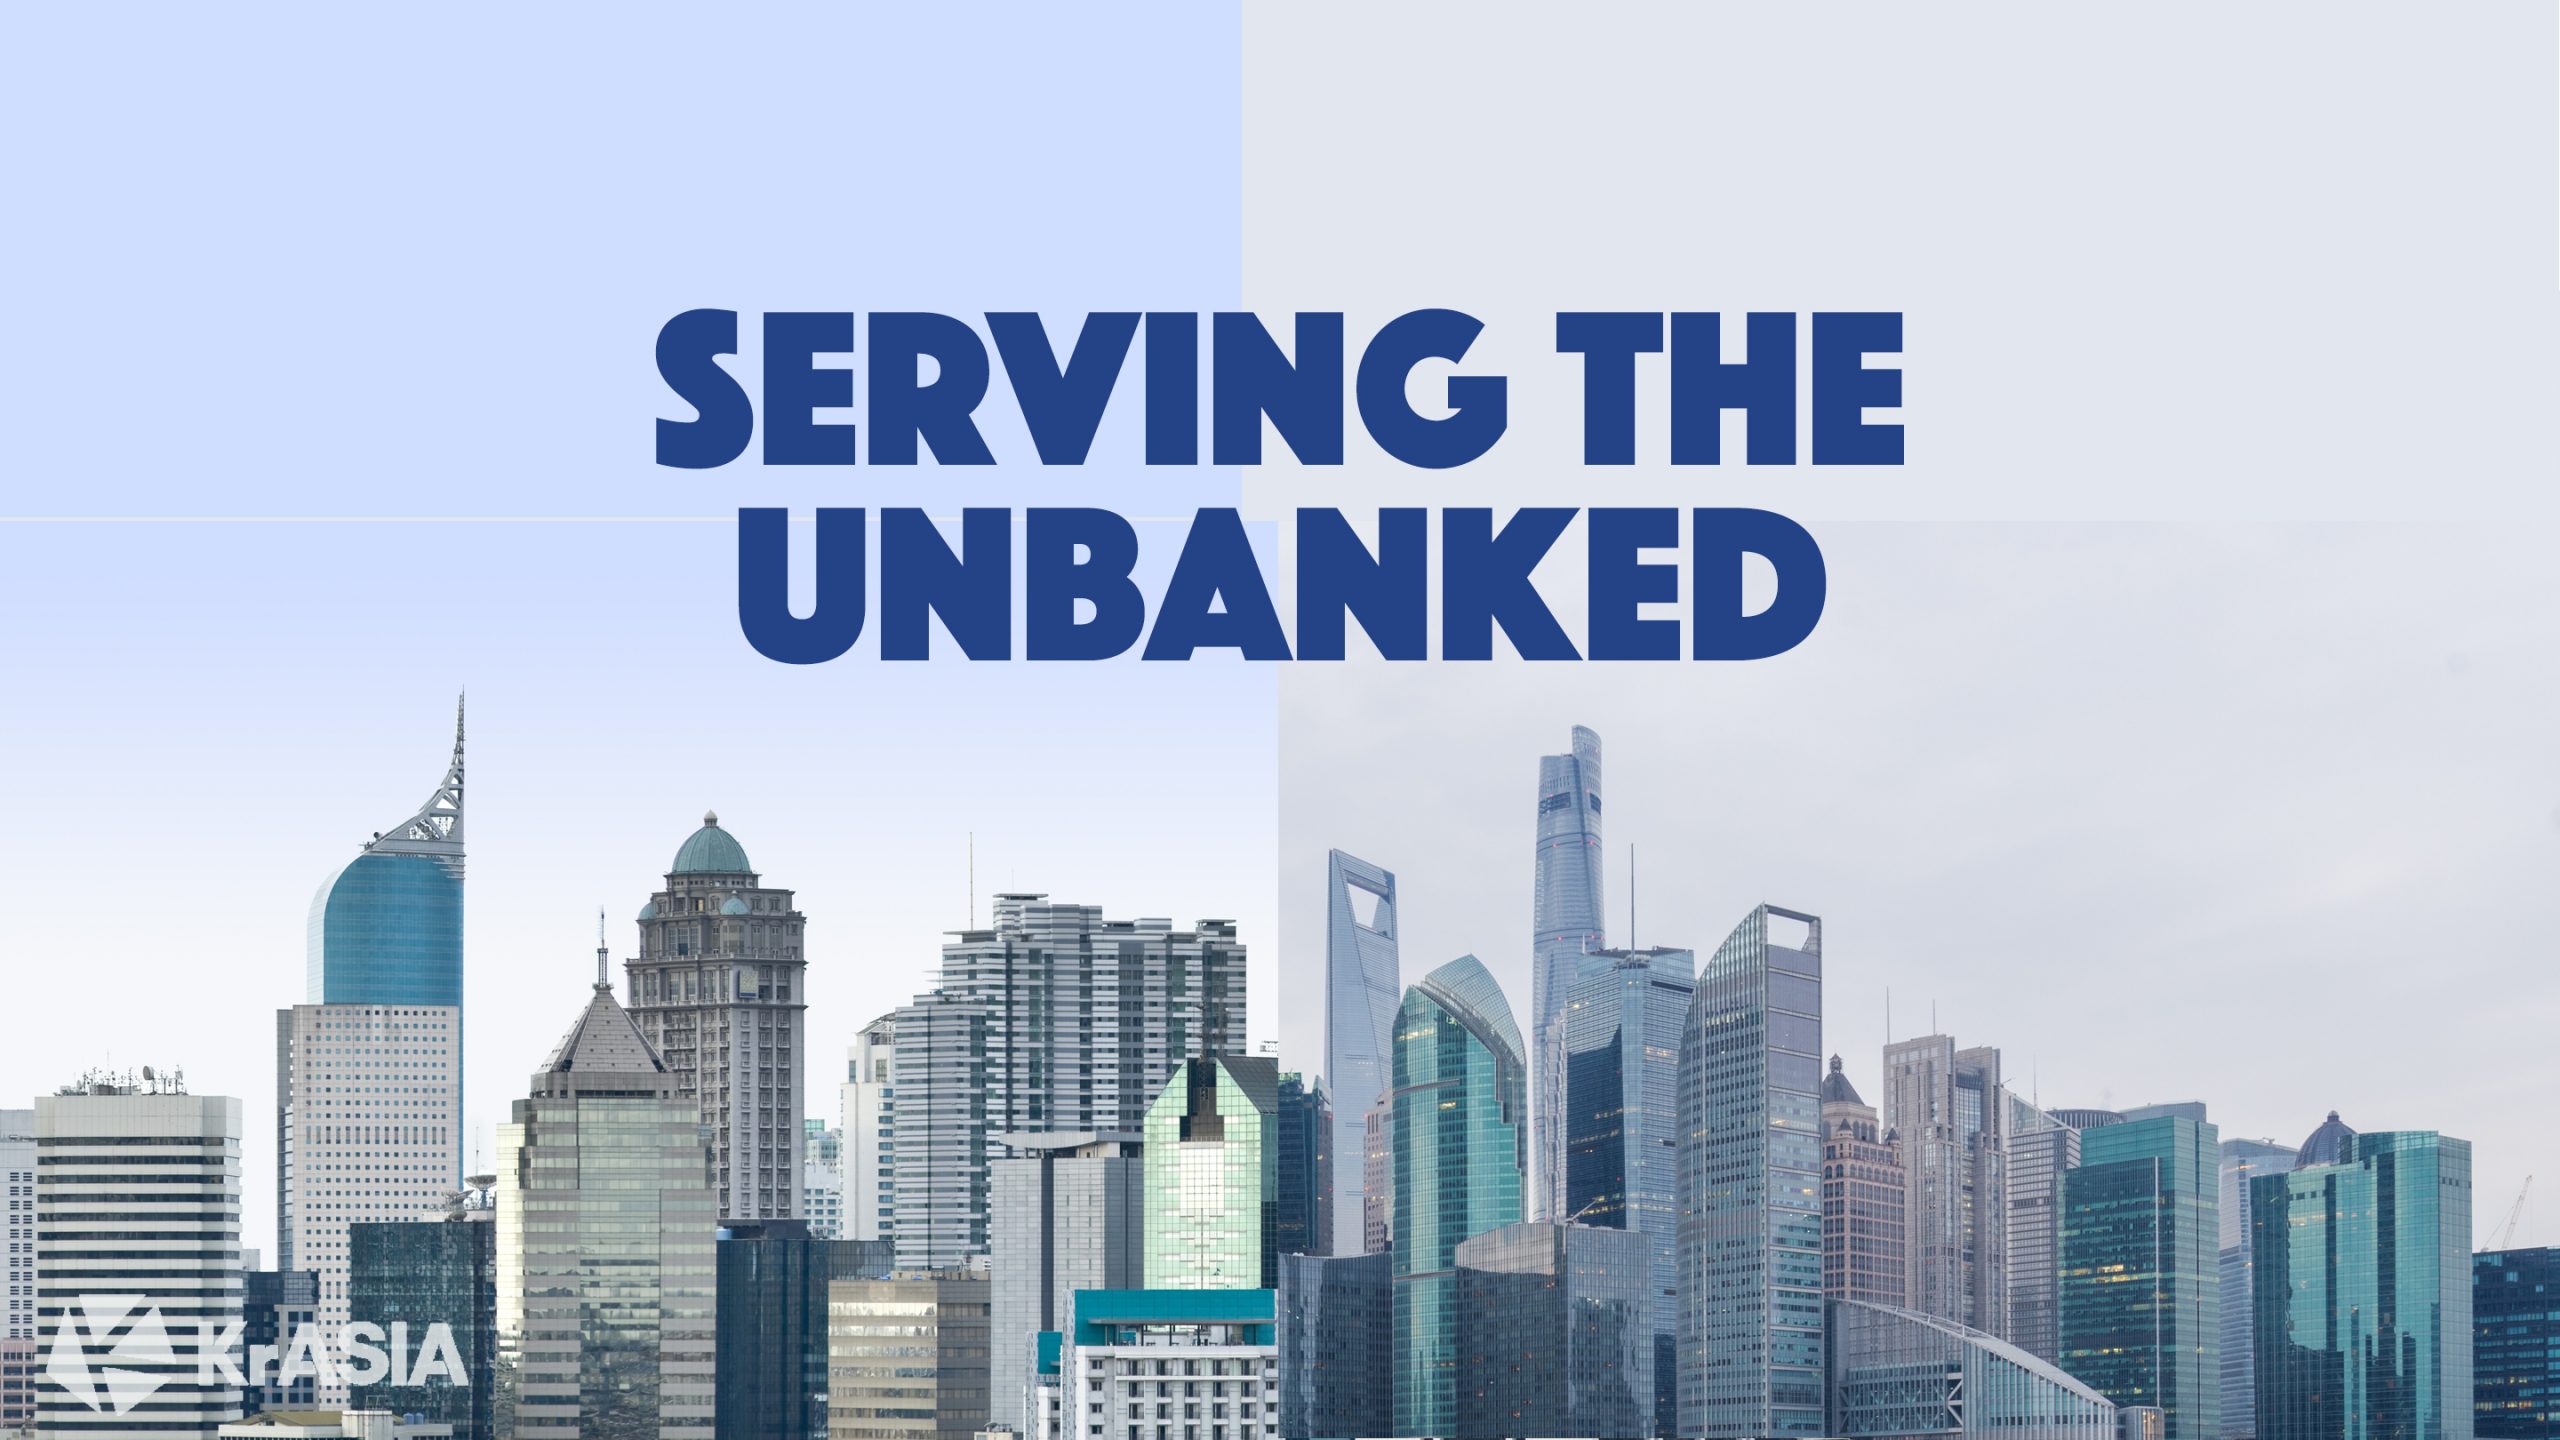 Serving the unbanked: China’s influence on Indonesia’s fintech development (Part 1 of 2)